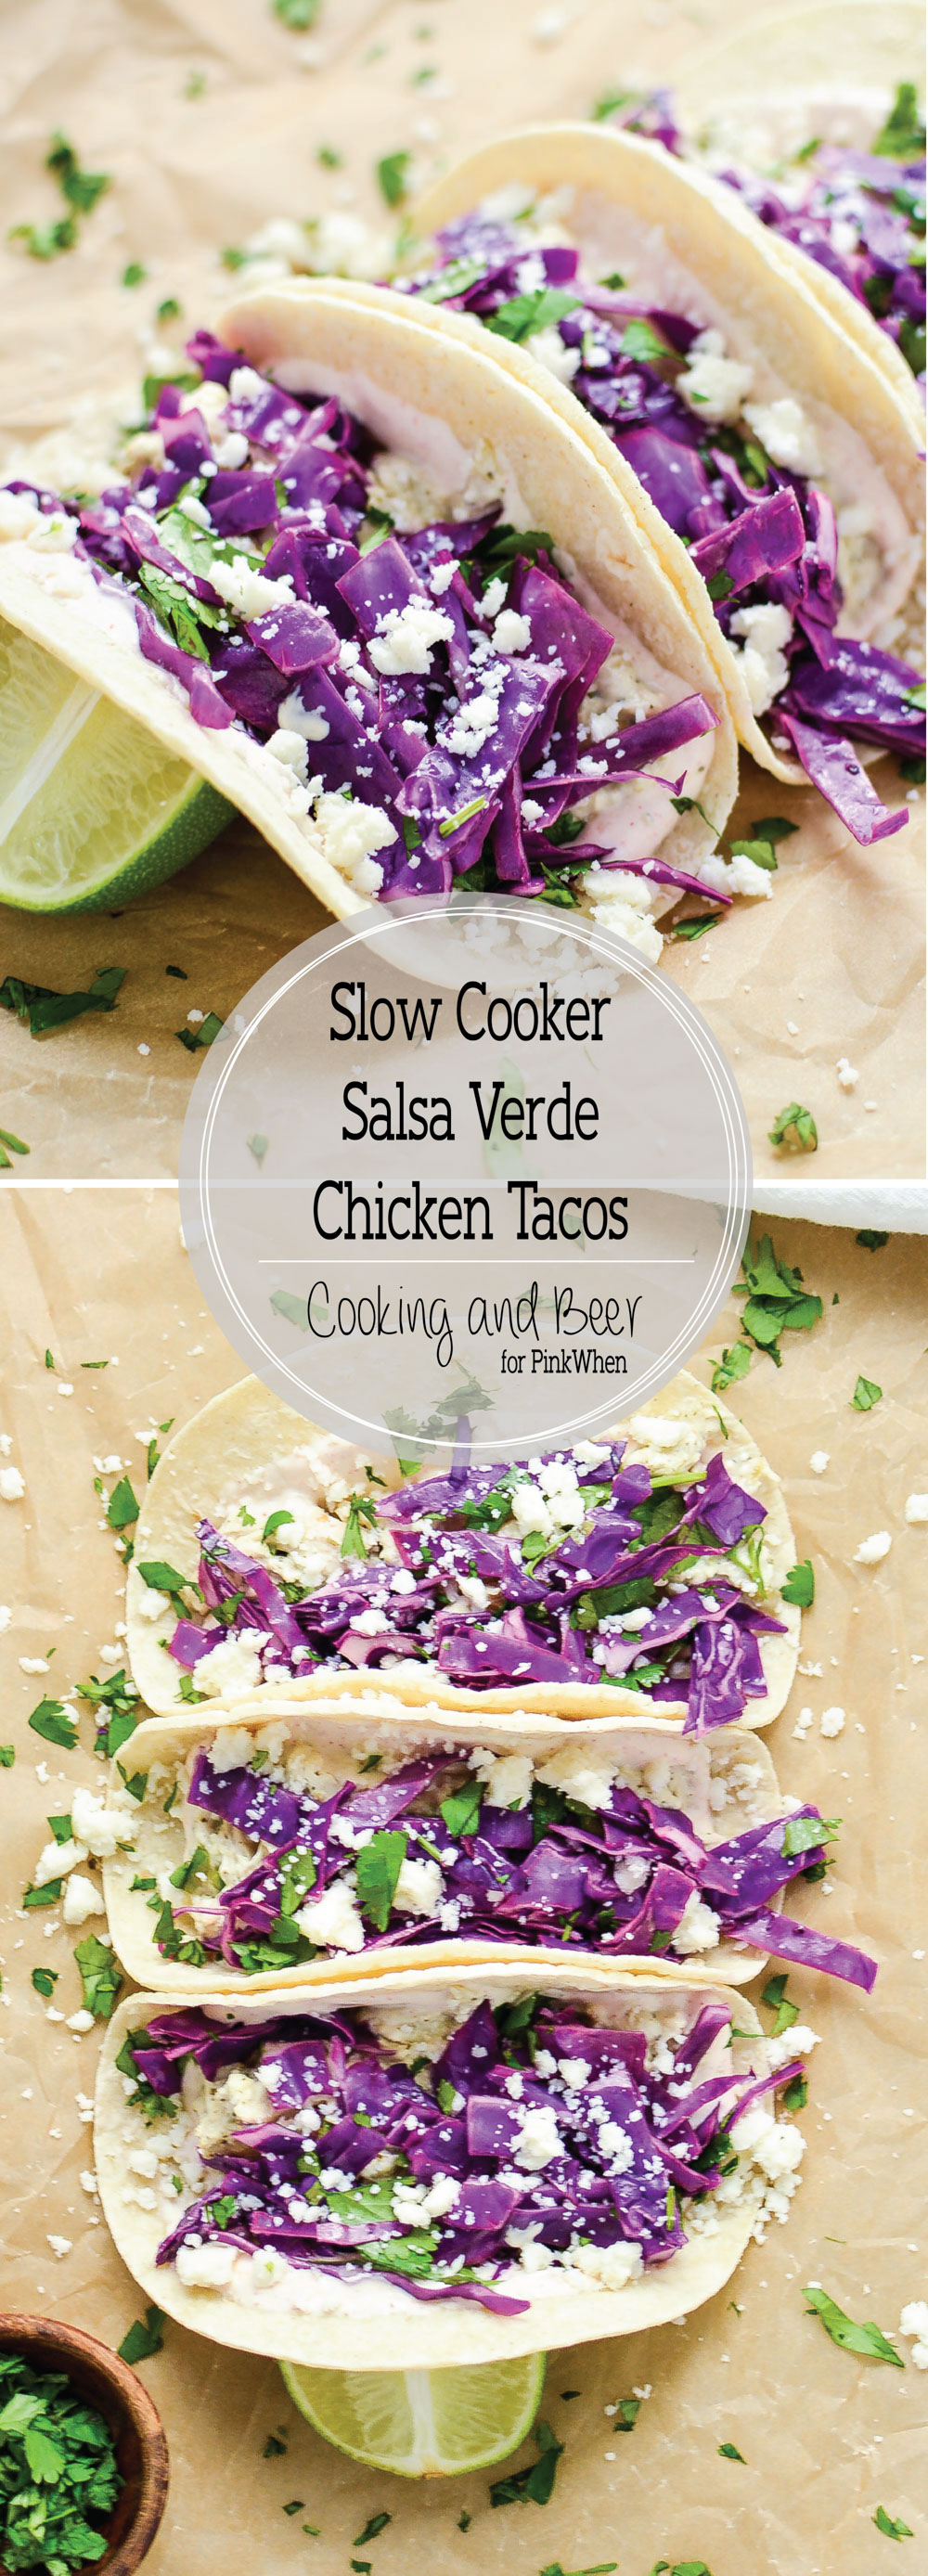 Slow Cooker Salsa Verde Chicken Tacos are a family-friendly weeknight meal that packs a ton of flavor and texture!